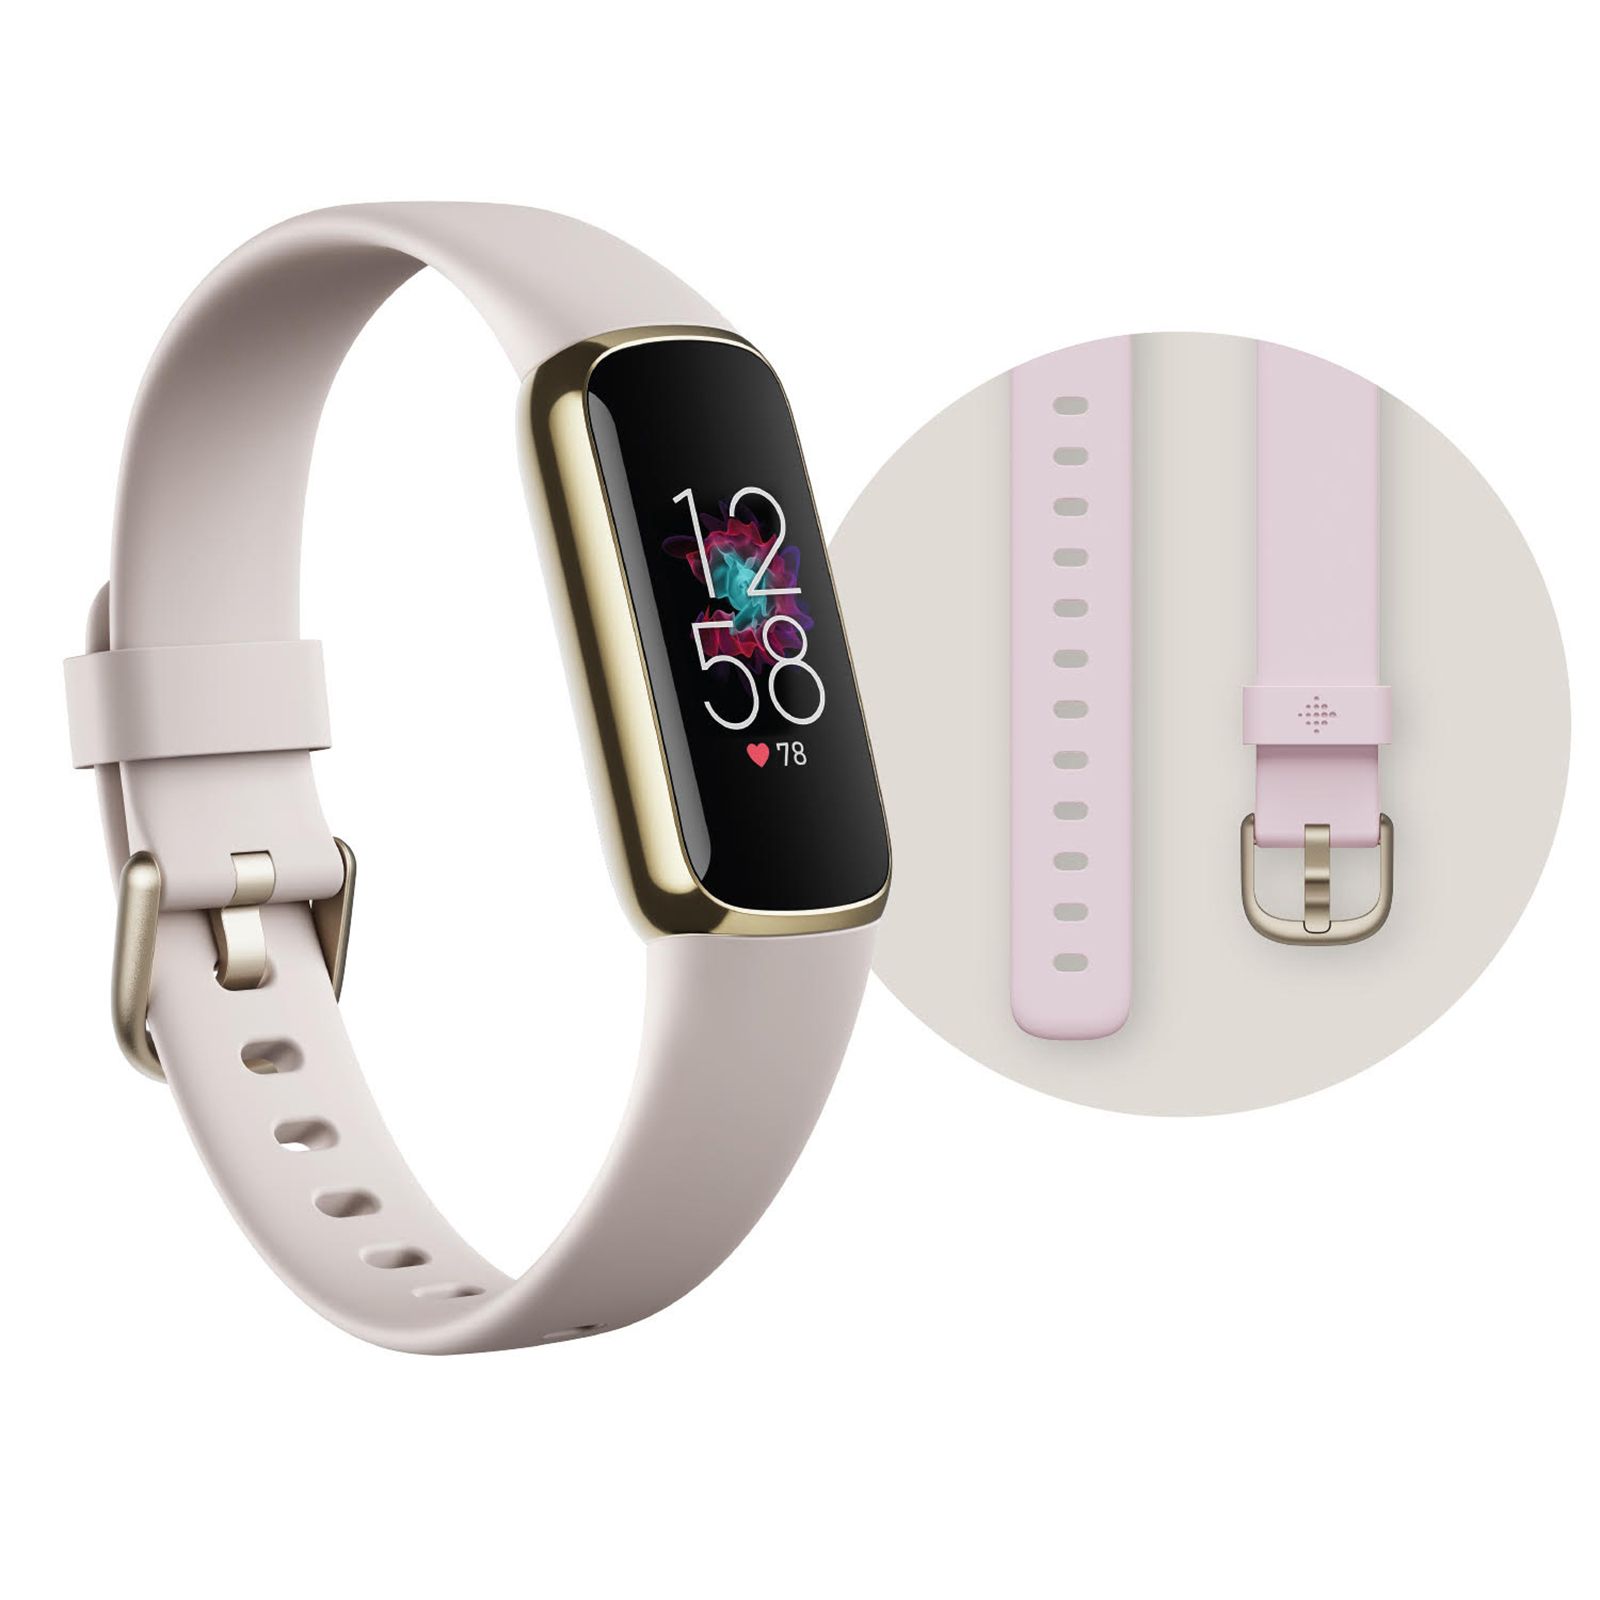 Fitbit Luxe Fitness and Wellness Tracker Bundle | BJ's Wholesale Club